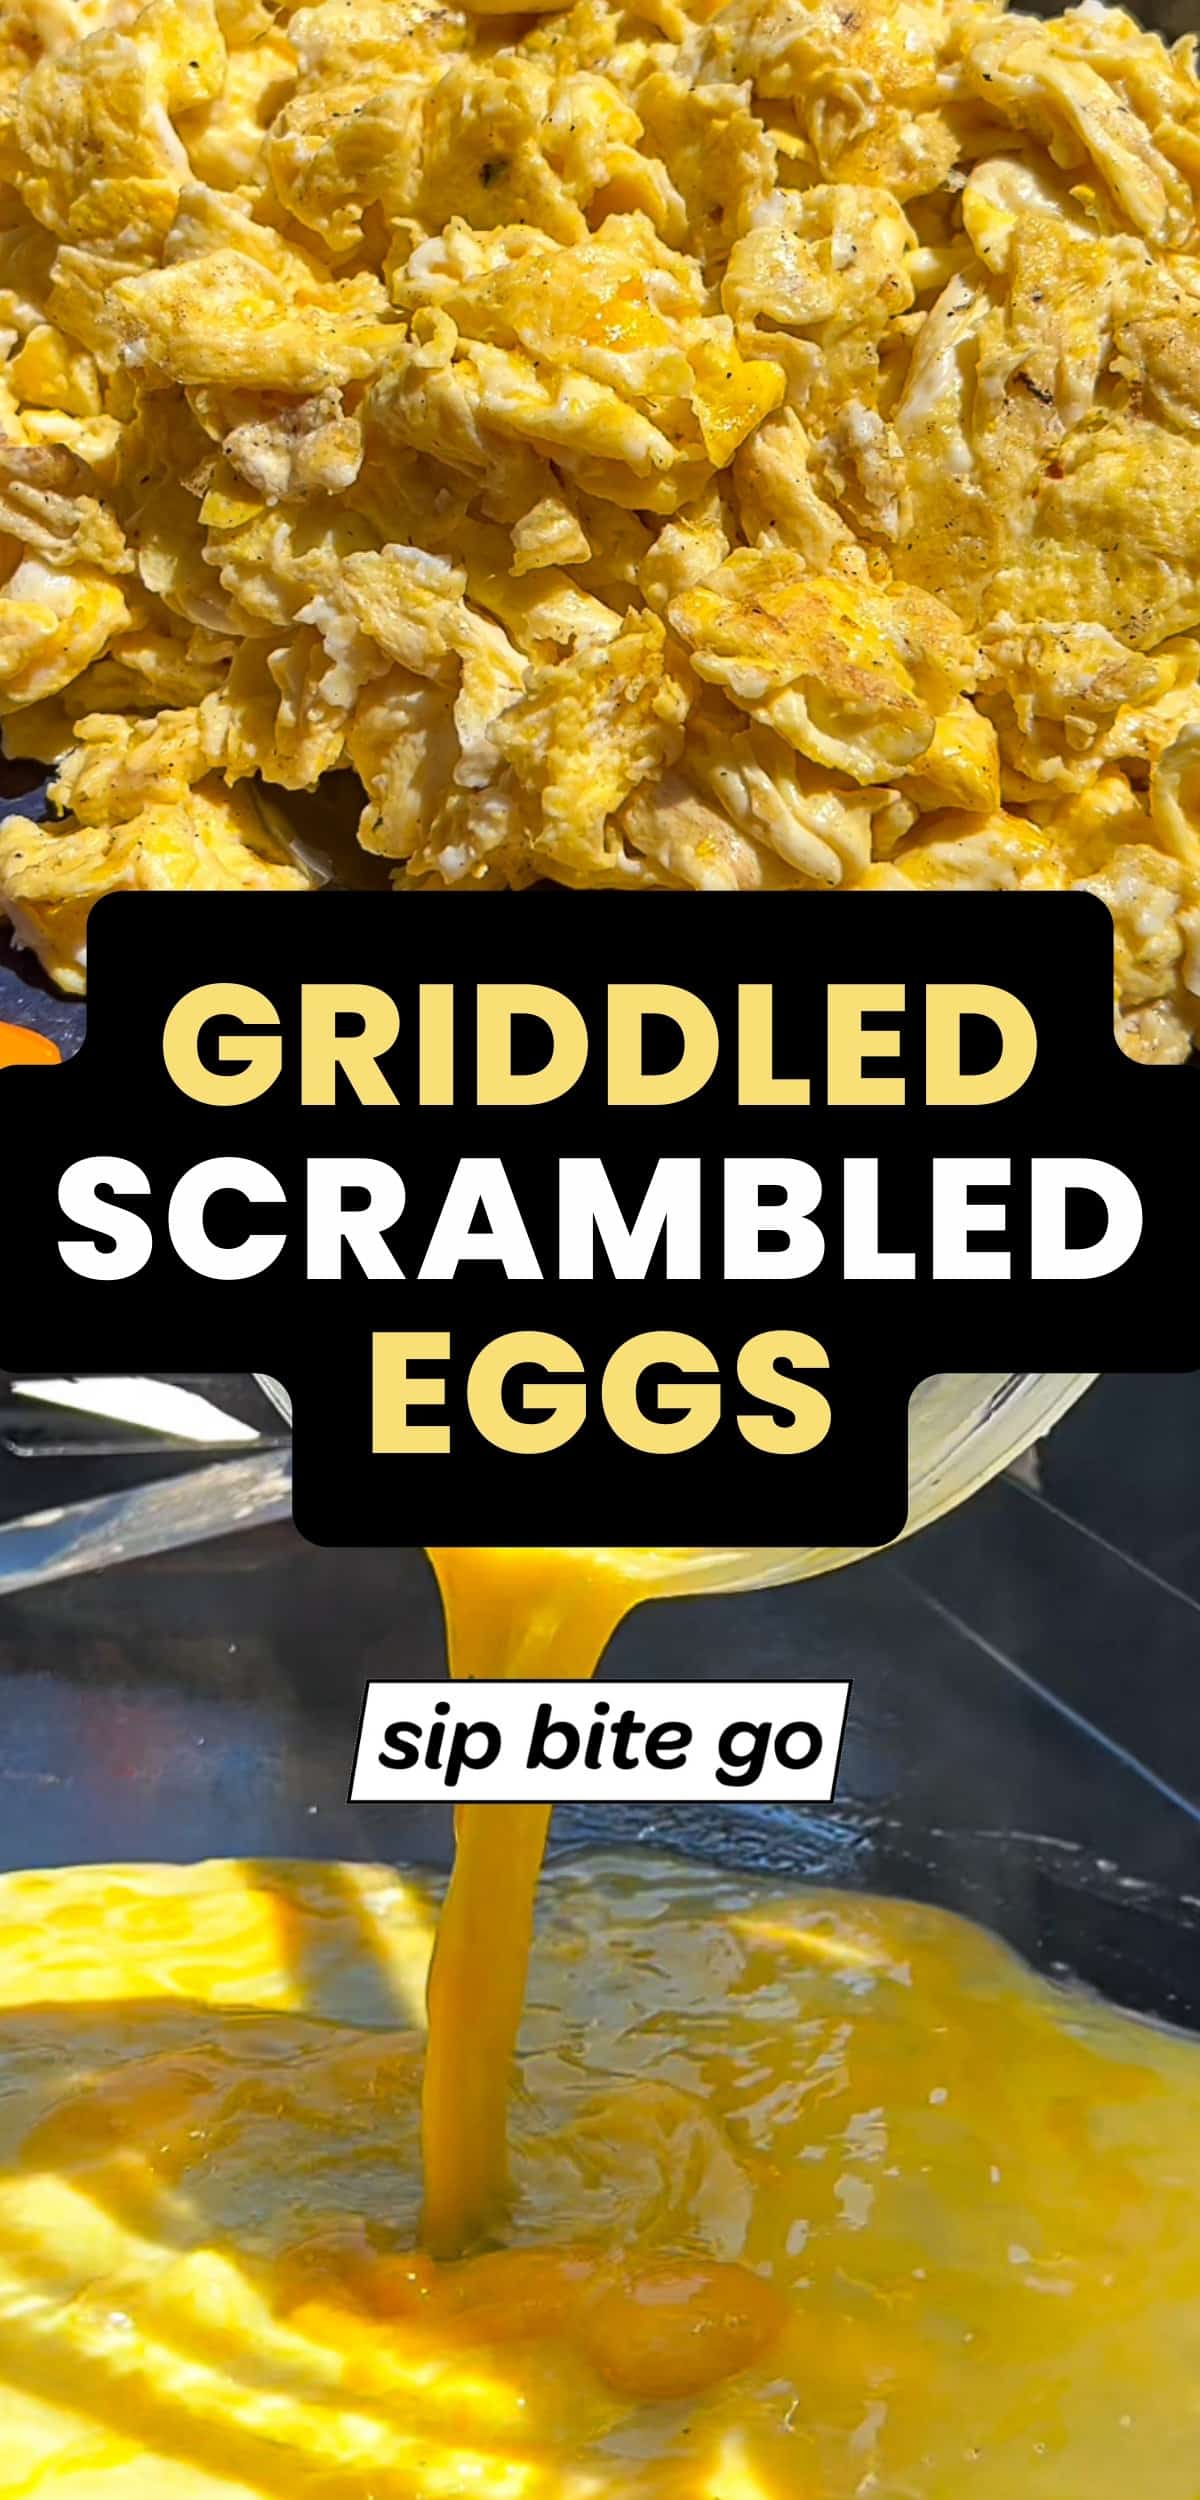 Recipe for Outdoor Griddle Scrambled Eggs with text overlay and Sip Bite Go logo